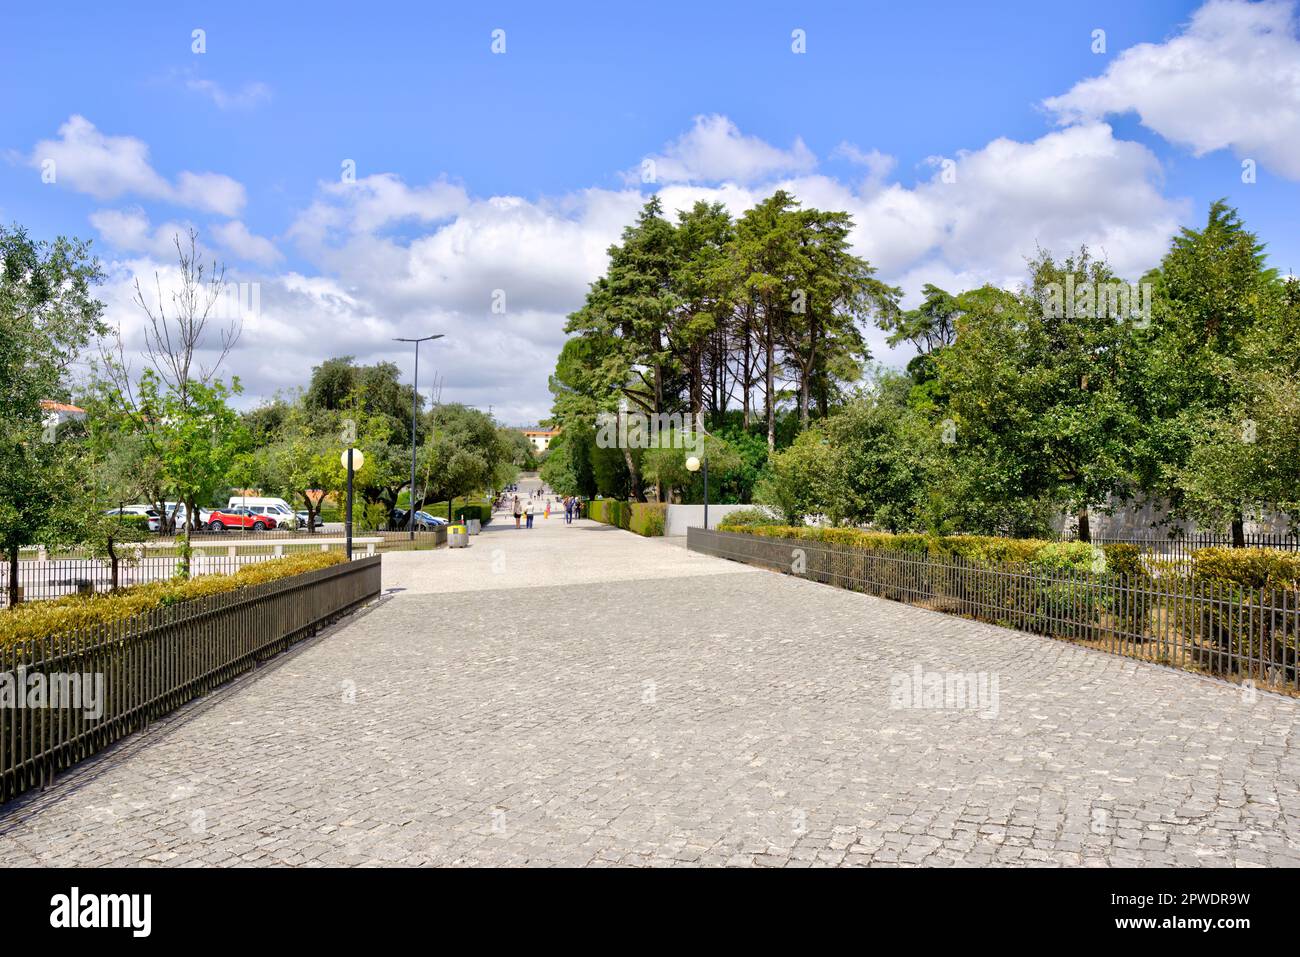 Fatima, Portugal - August 15, 2022: Access path with trees and bushes surrounding cobble stone path Stock Photo